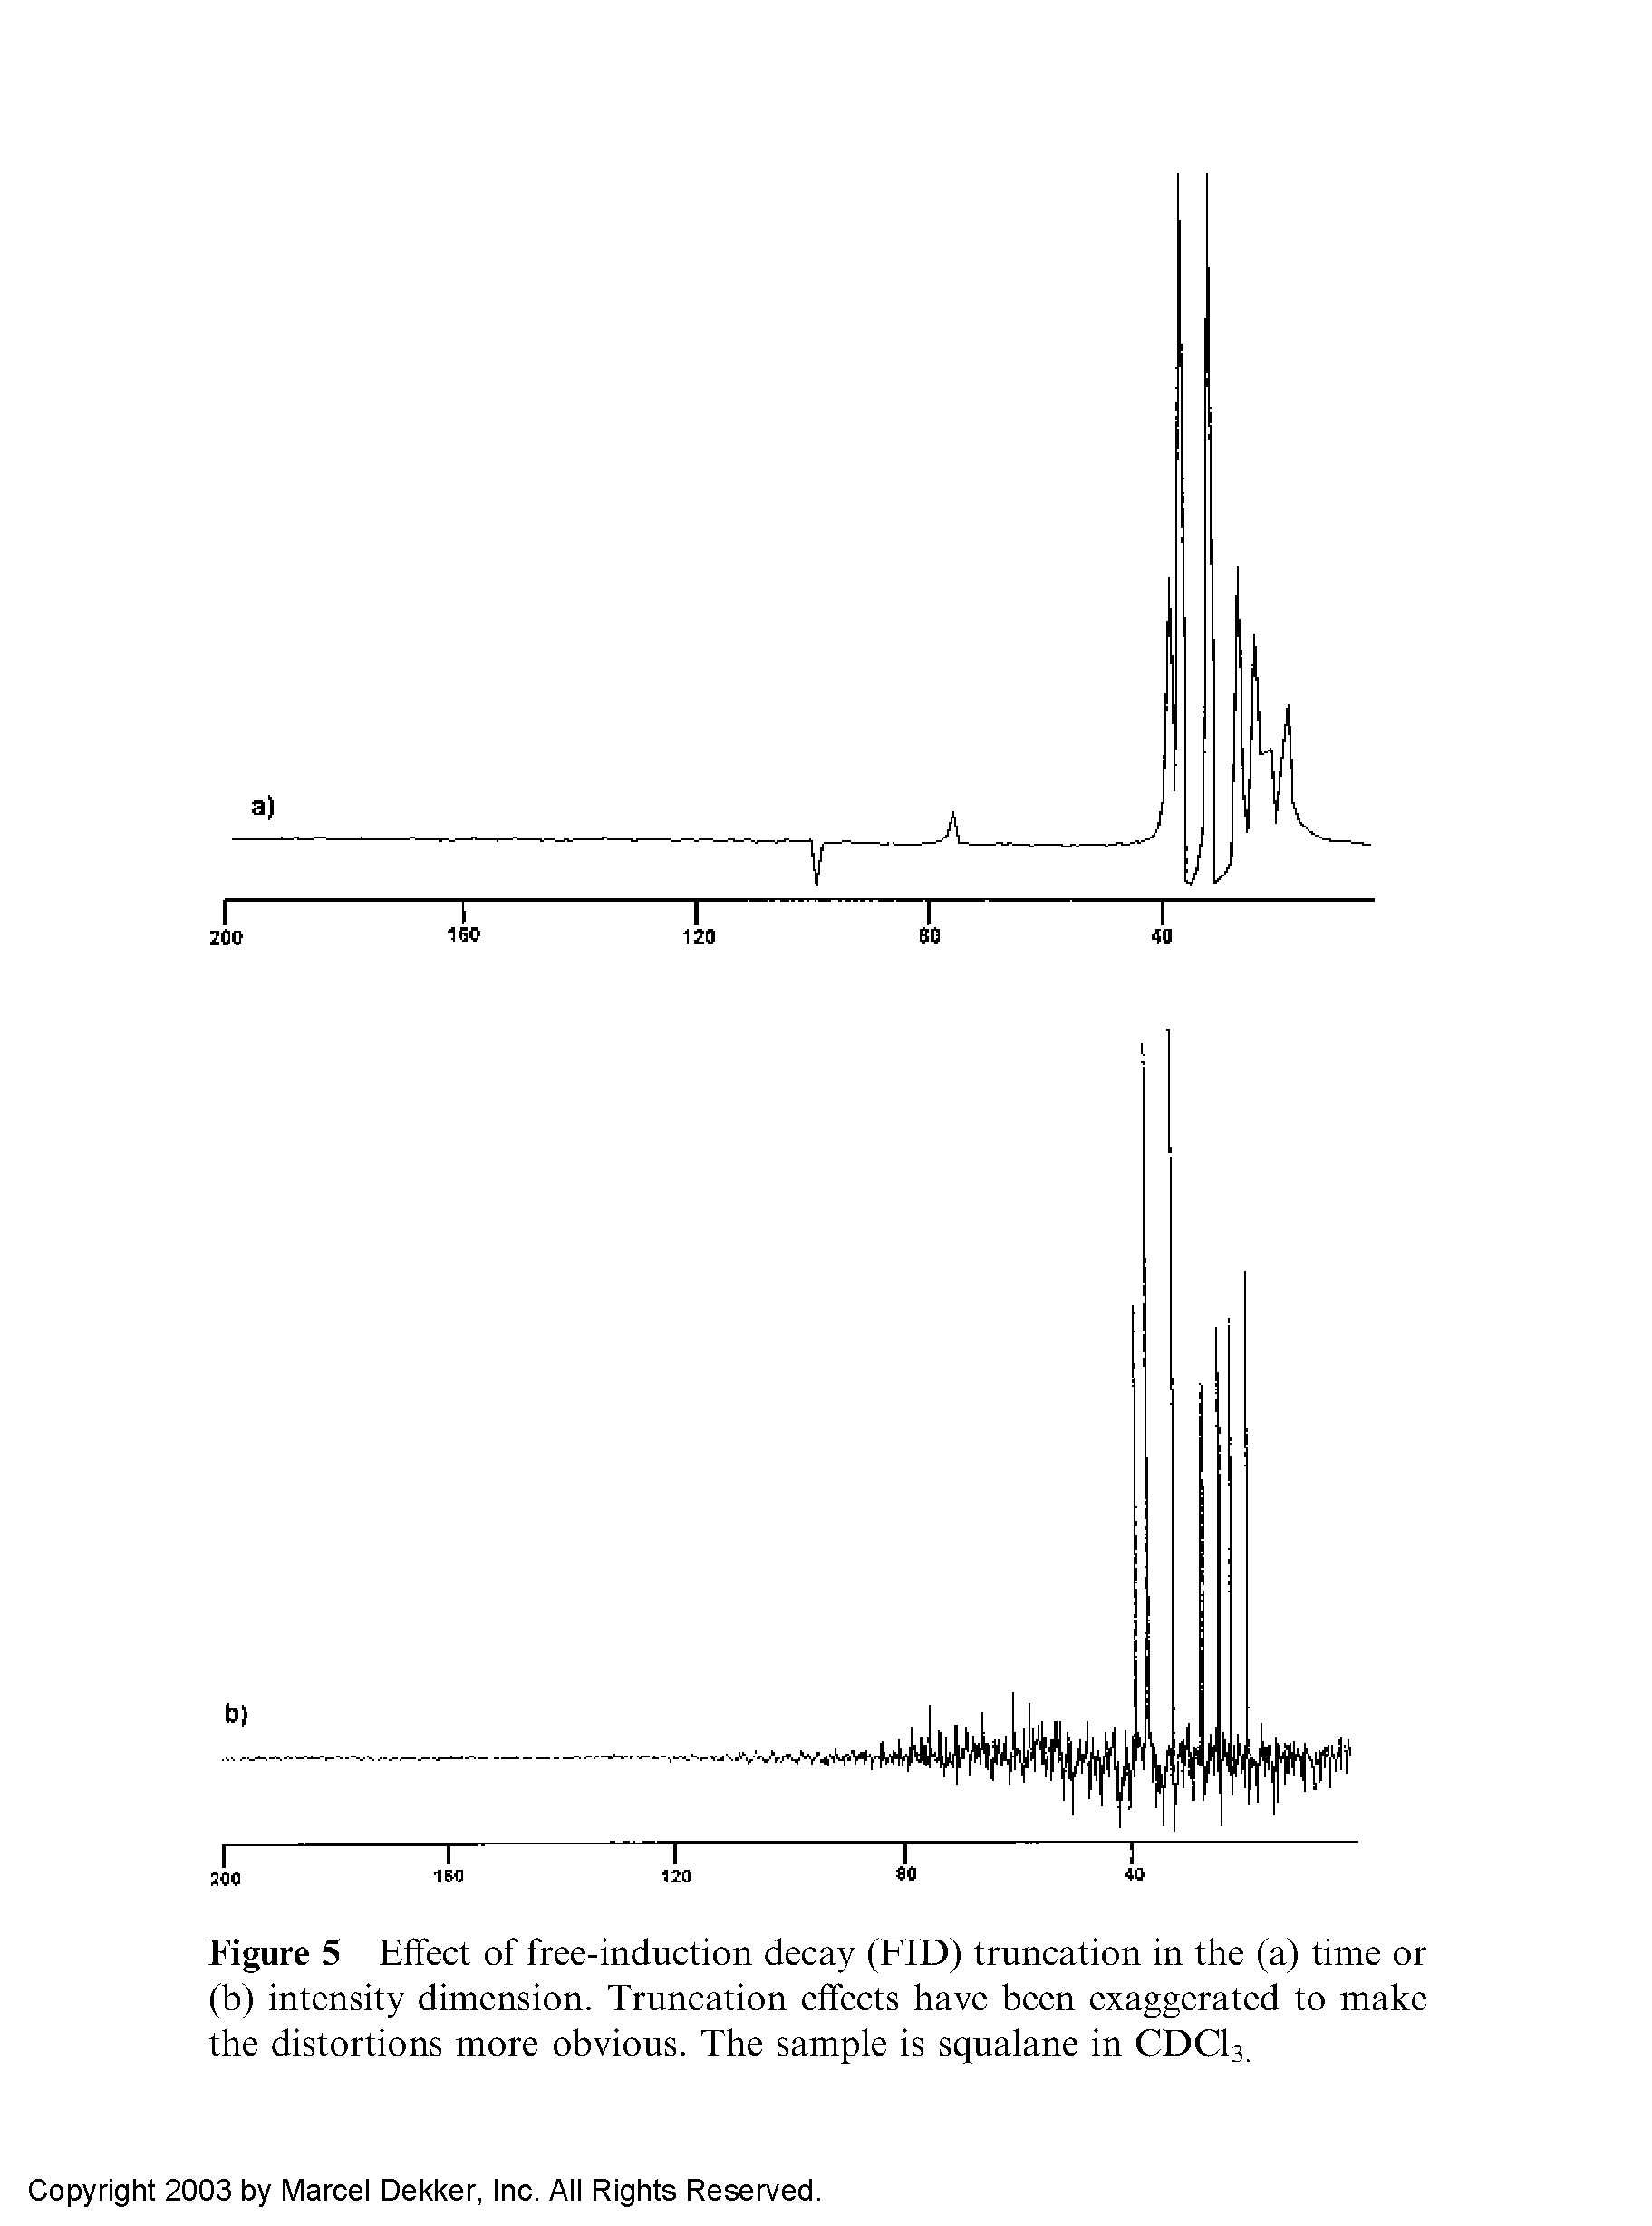 Figure 5 Effect of free-induction decay (FID) truncation in the (a) time or (b) intensity dimension. Truncation effects have been exaggerated to make the distortions more obvious. The sample is squalane in CDCI3.